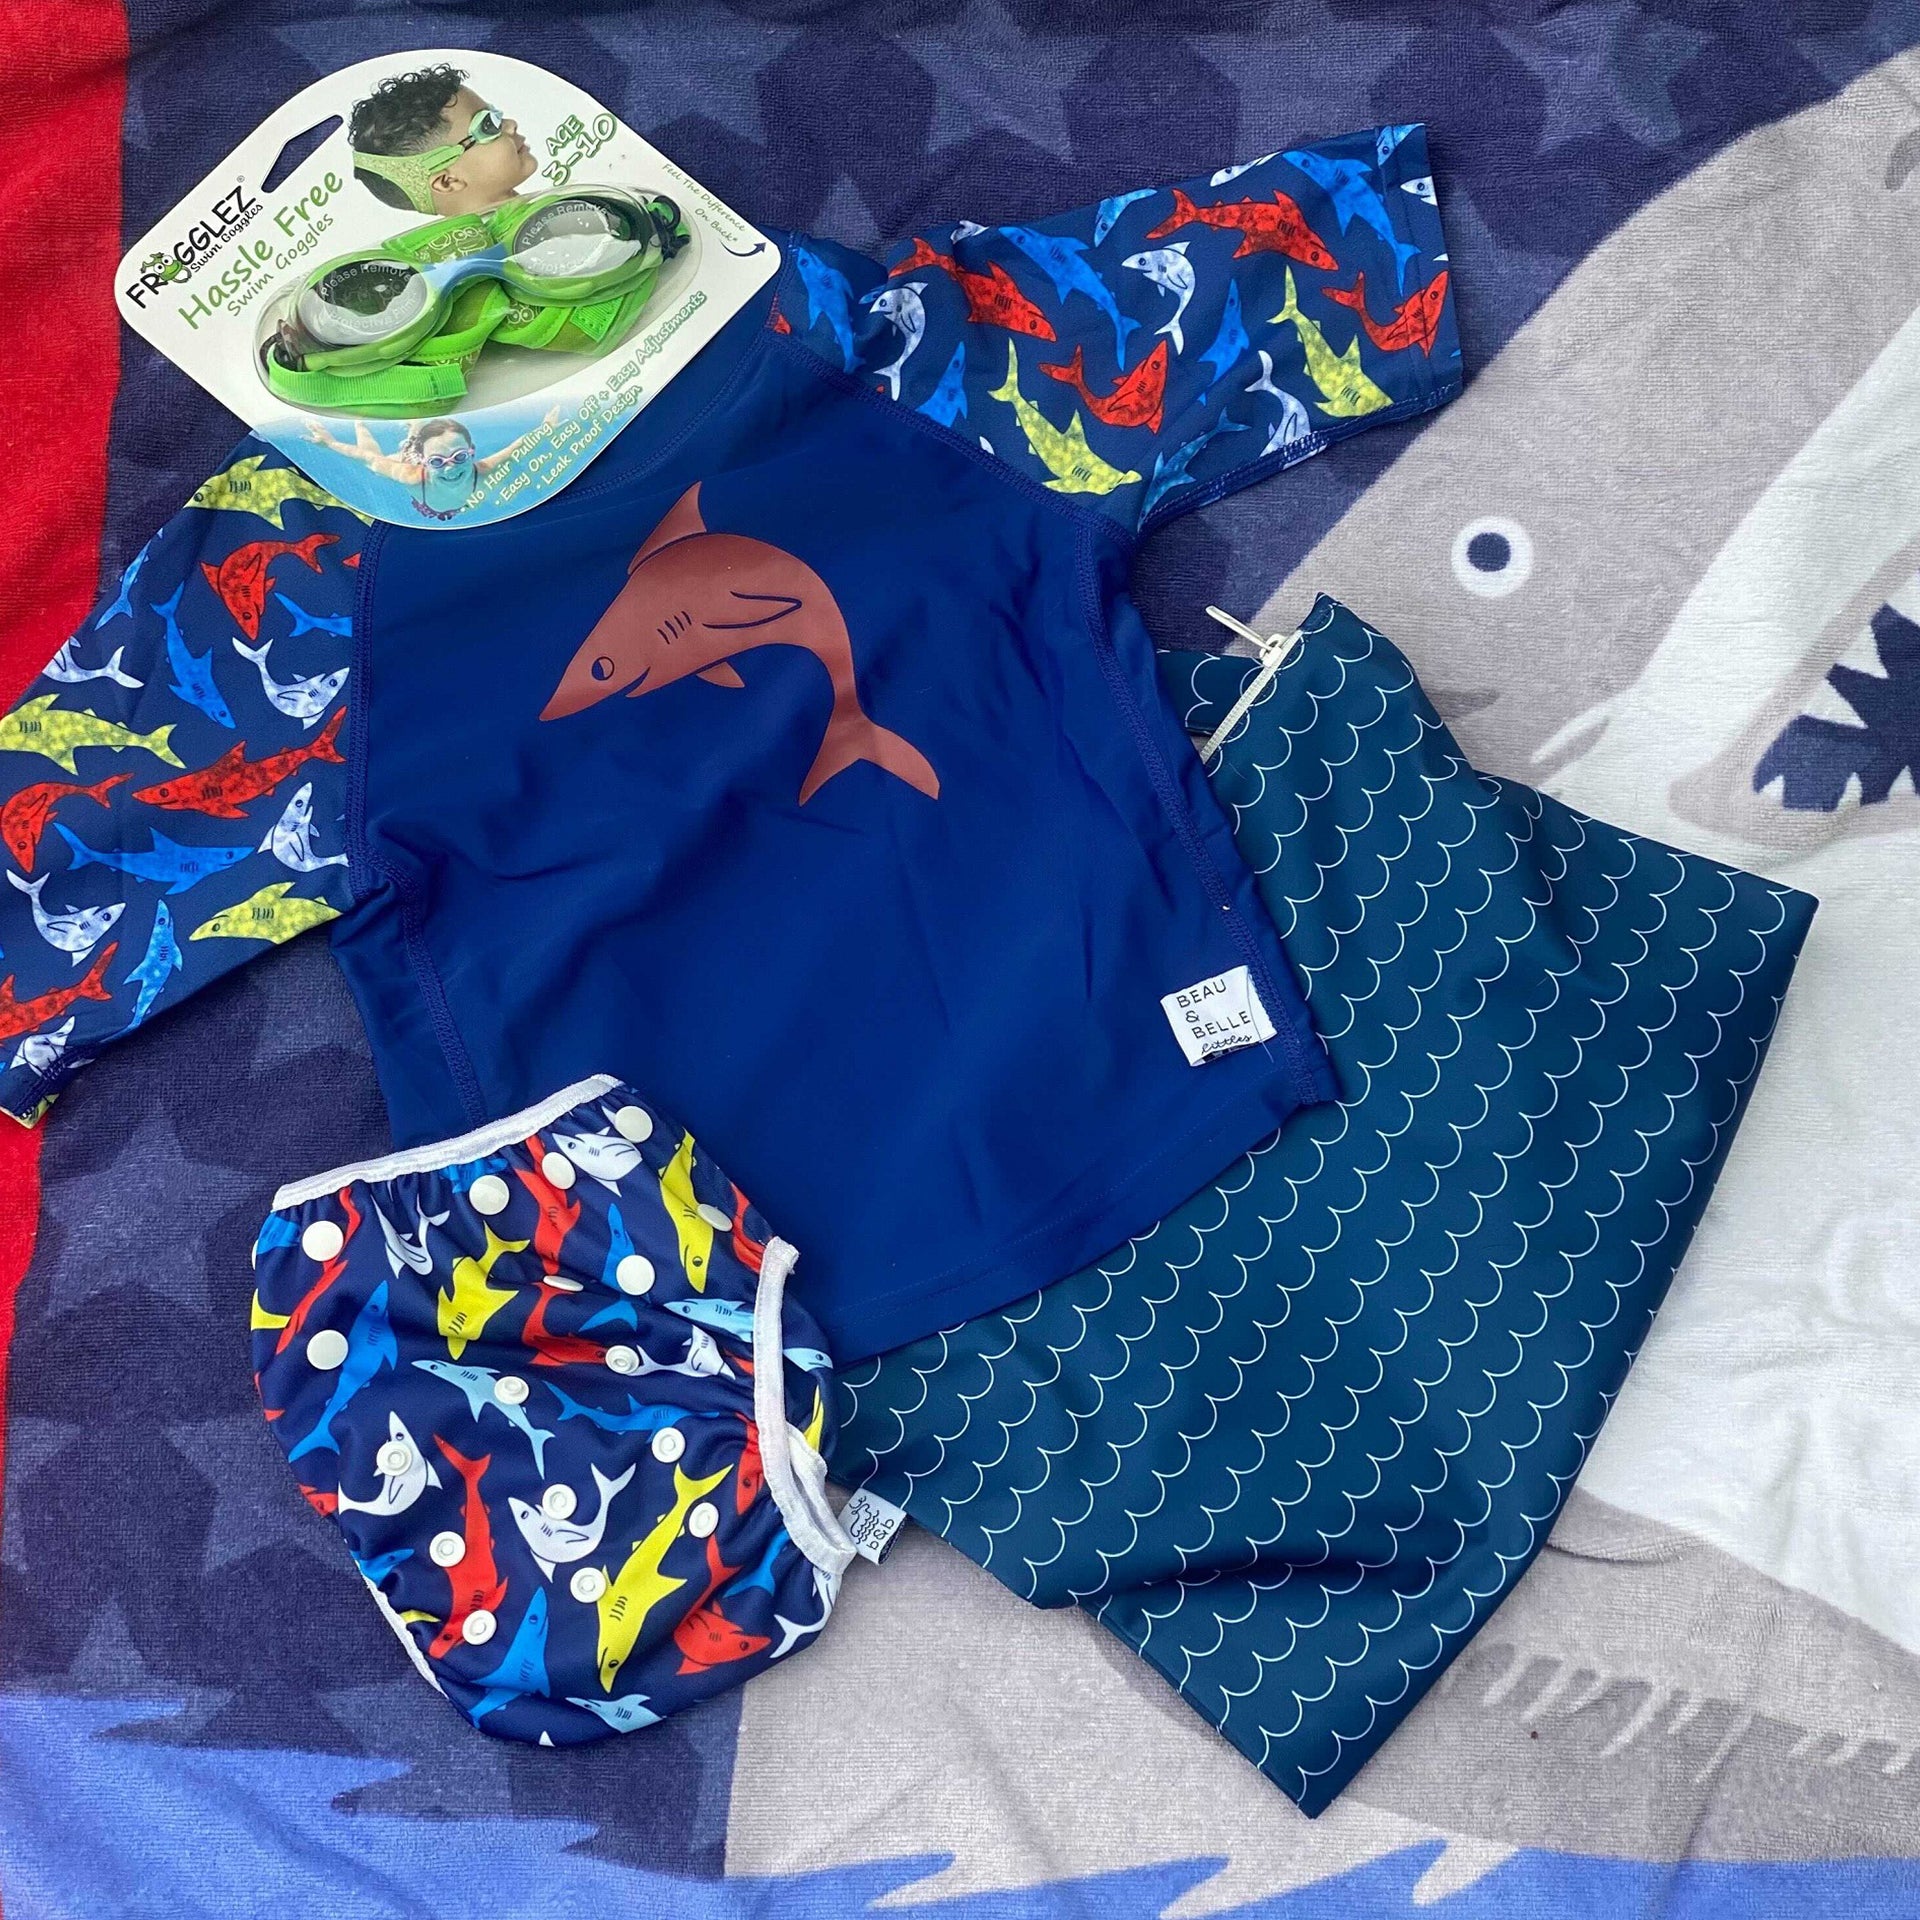 Swim Starter Kit for Babies and Toddlers | $100+ for only $64